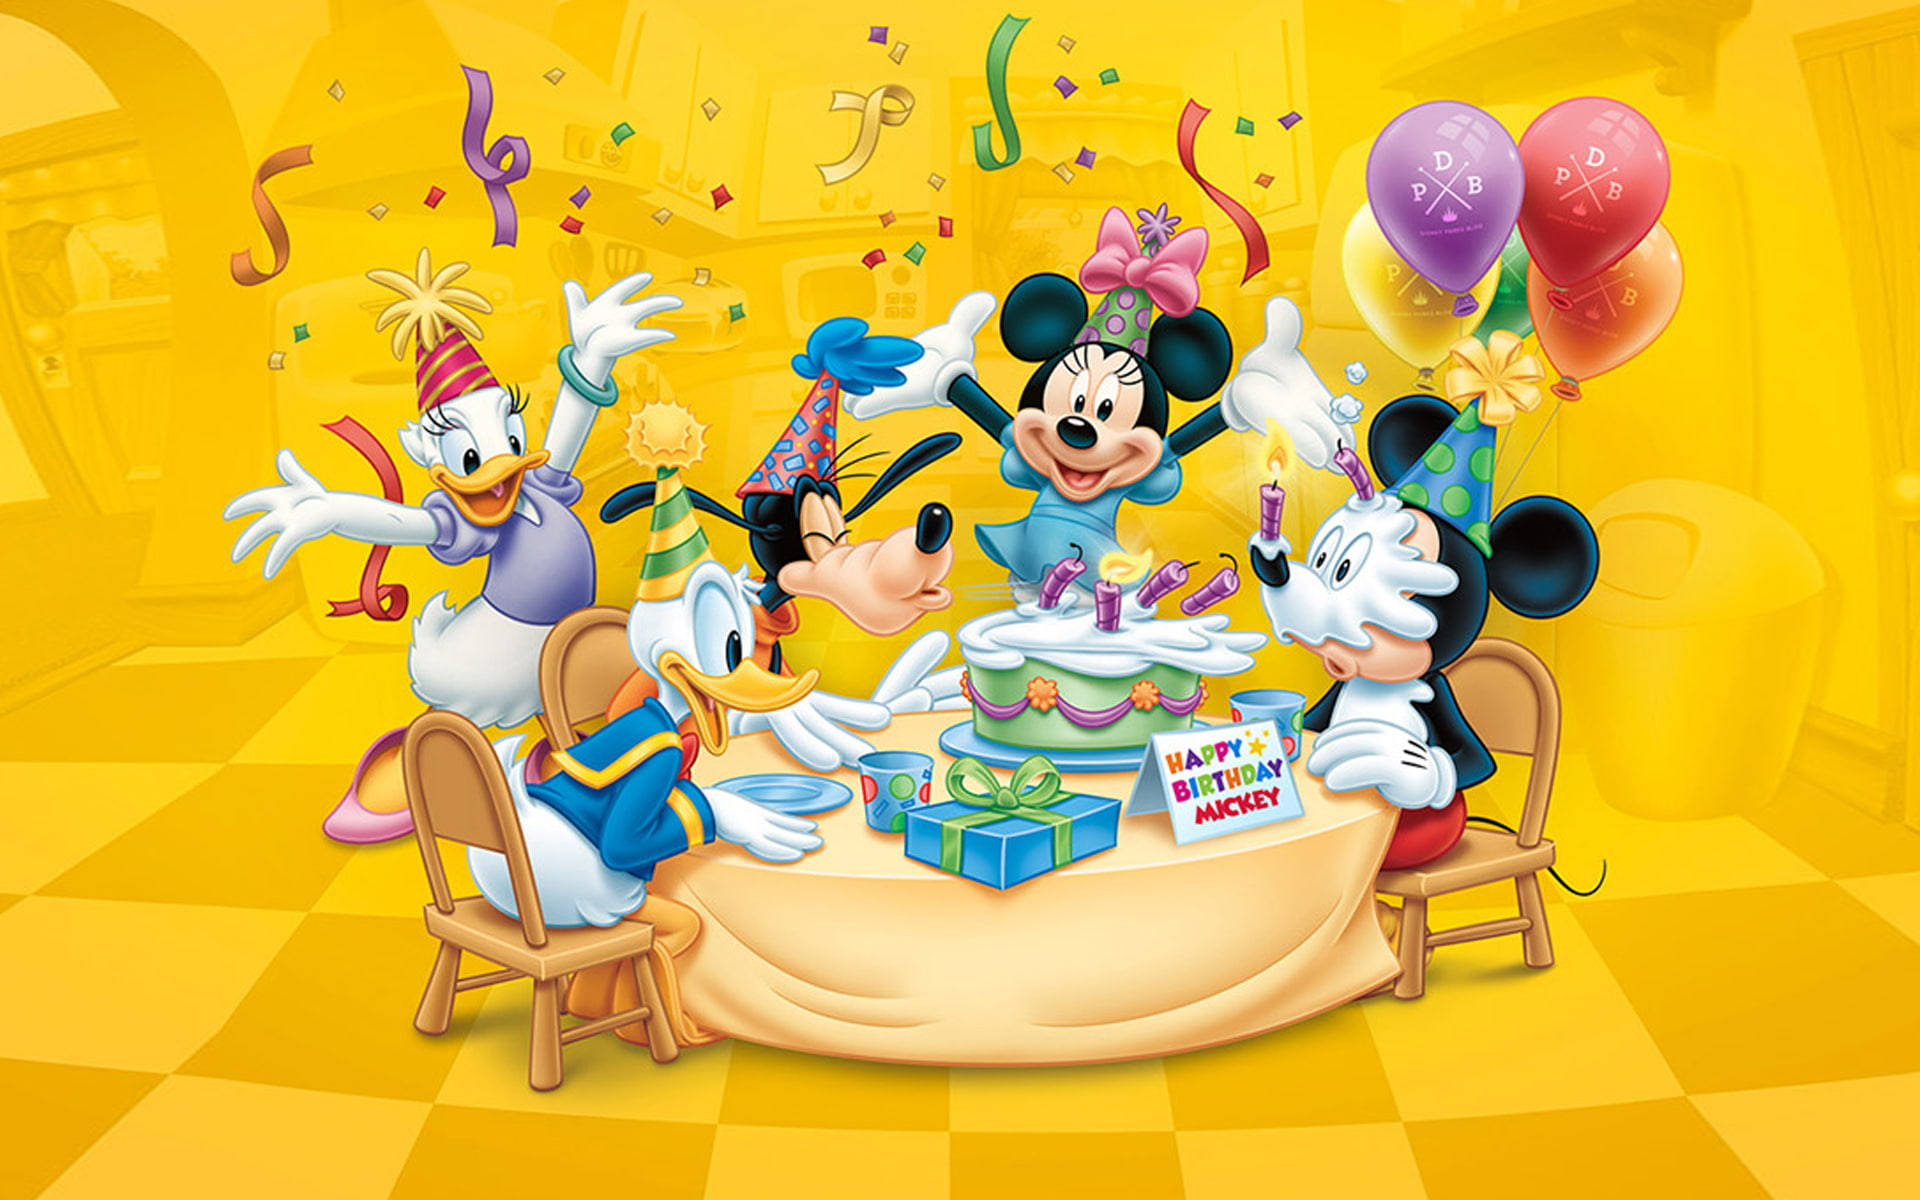 Glorious Mickey Mouse Birthday Celebration In A Vibrant Yellow Room. Background